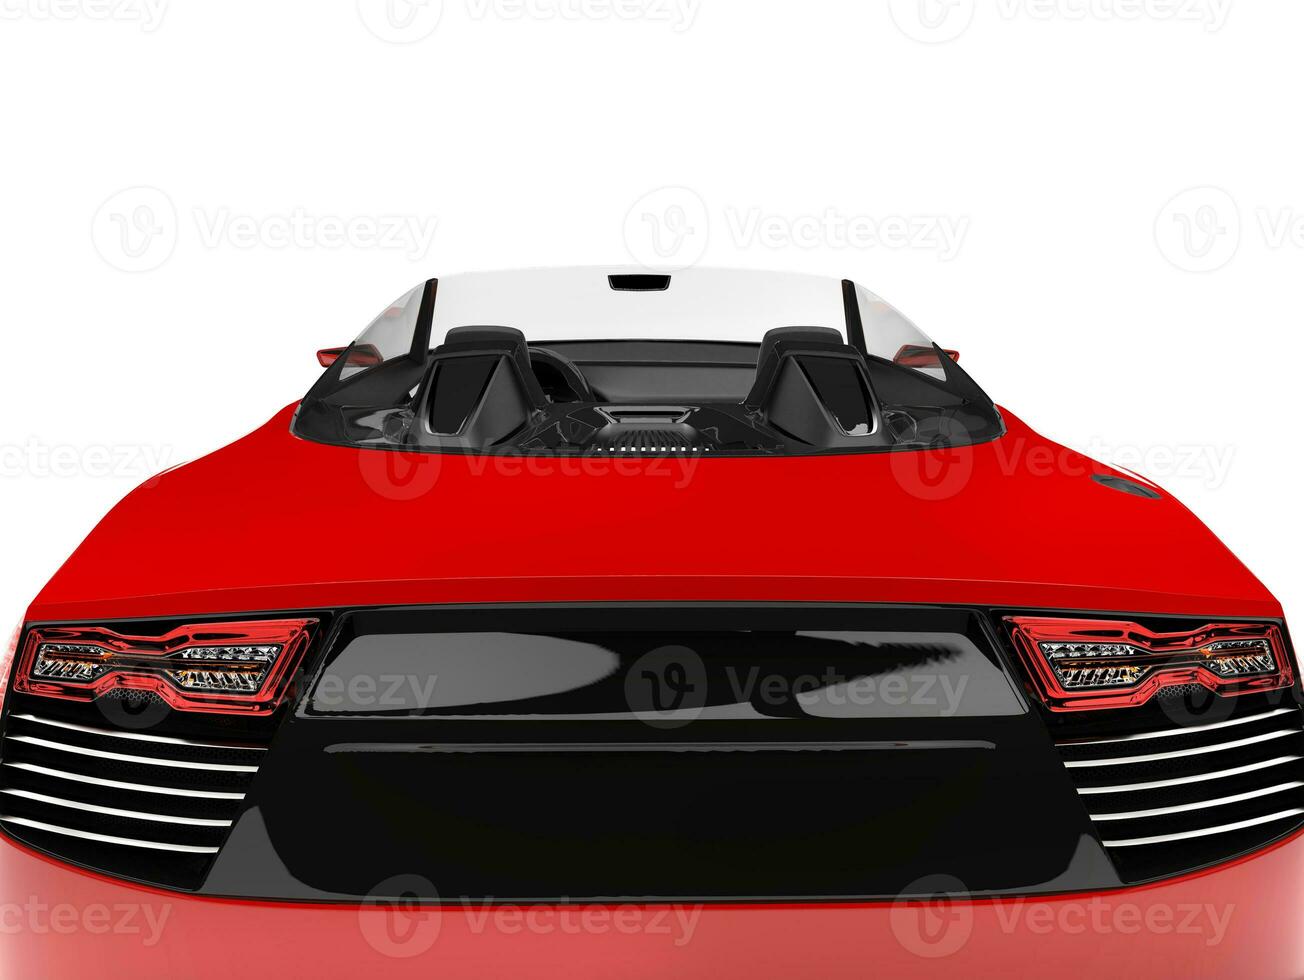 Raging red modern cabriolet super car - rear side view photo